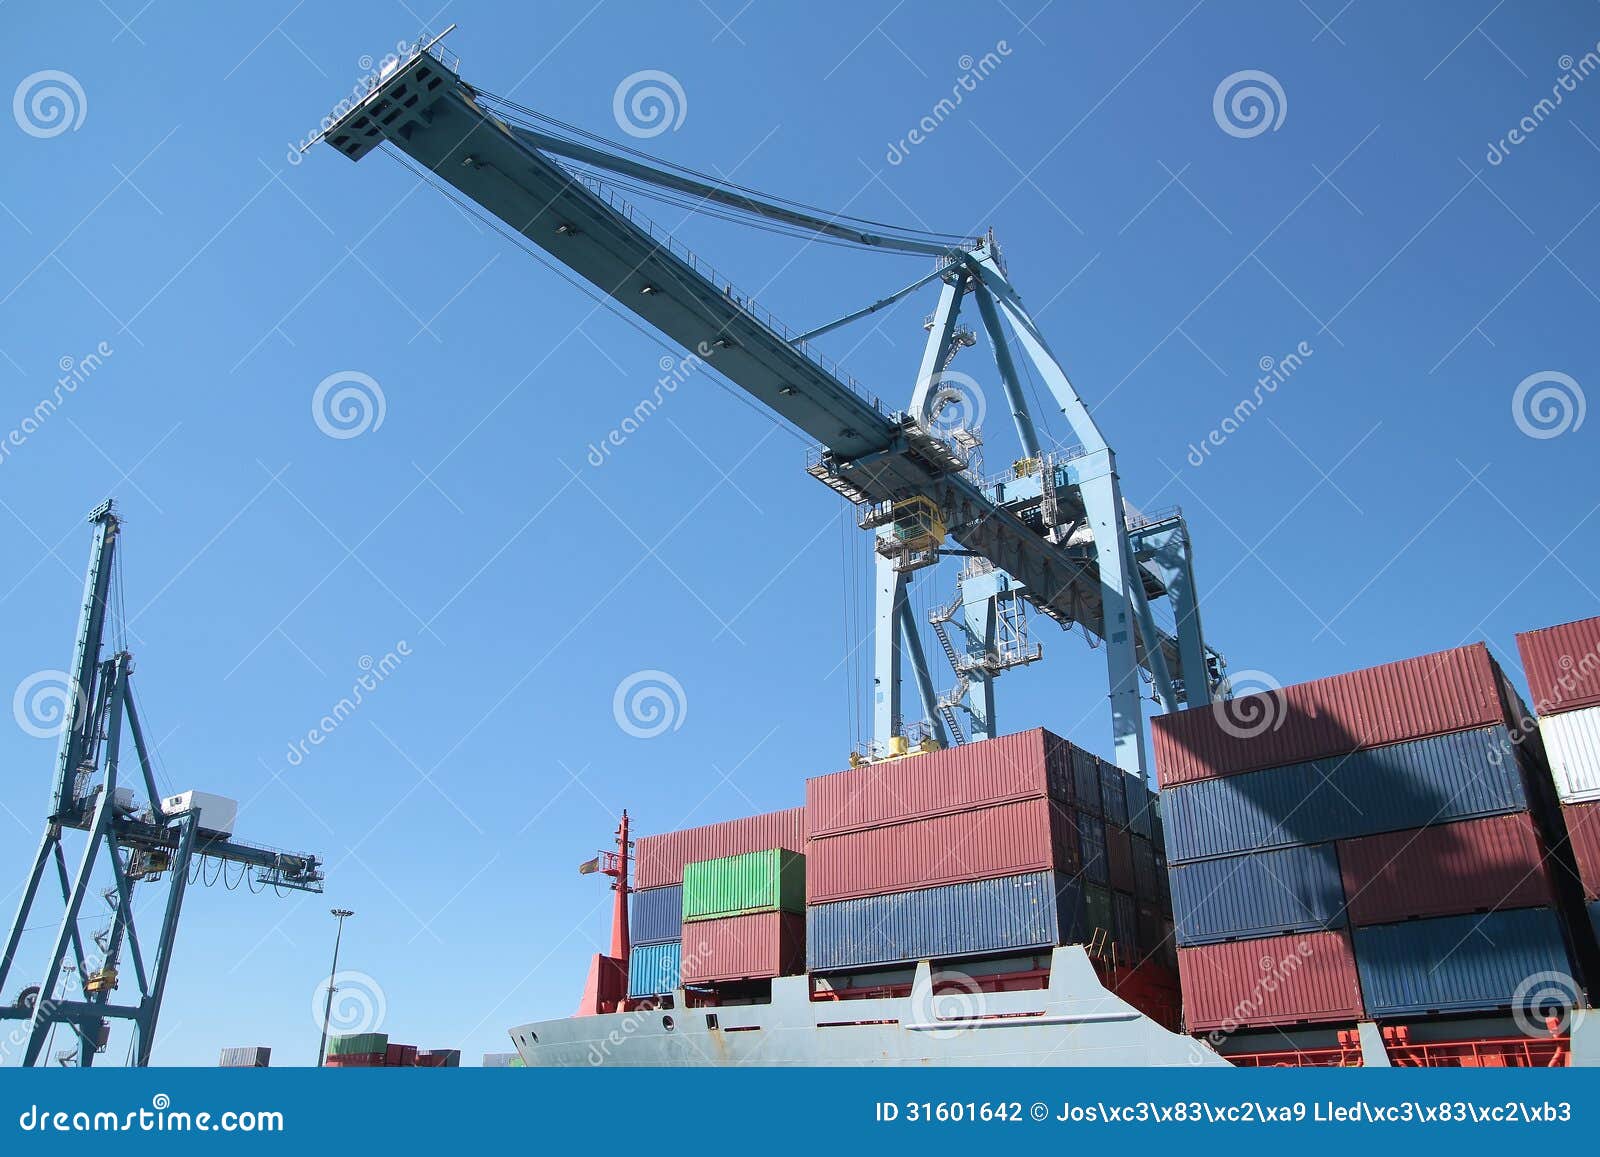 container ship in port